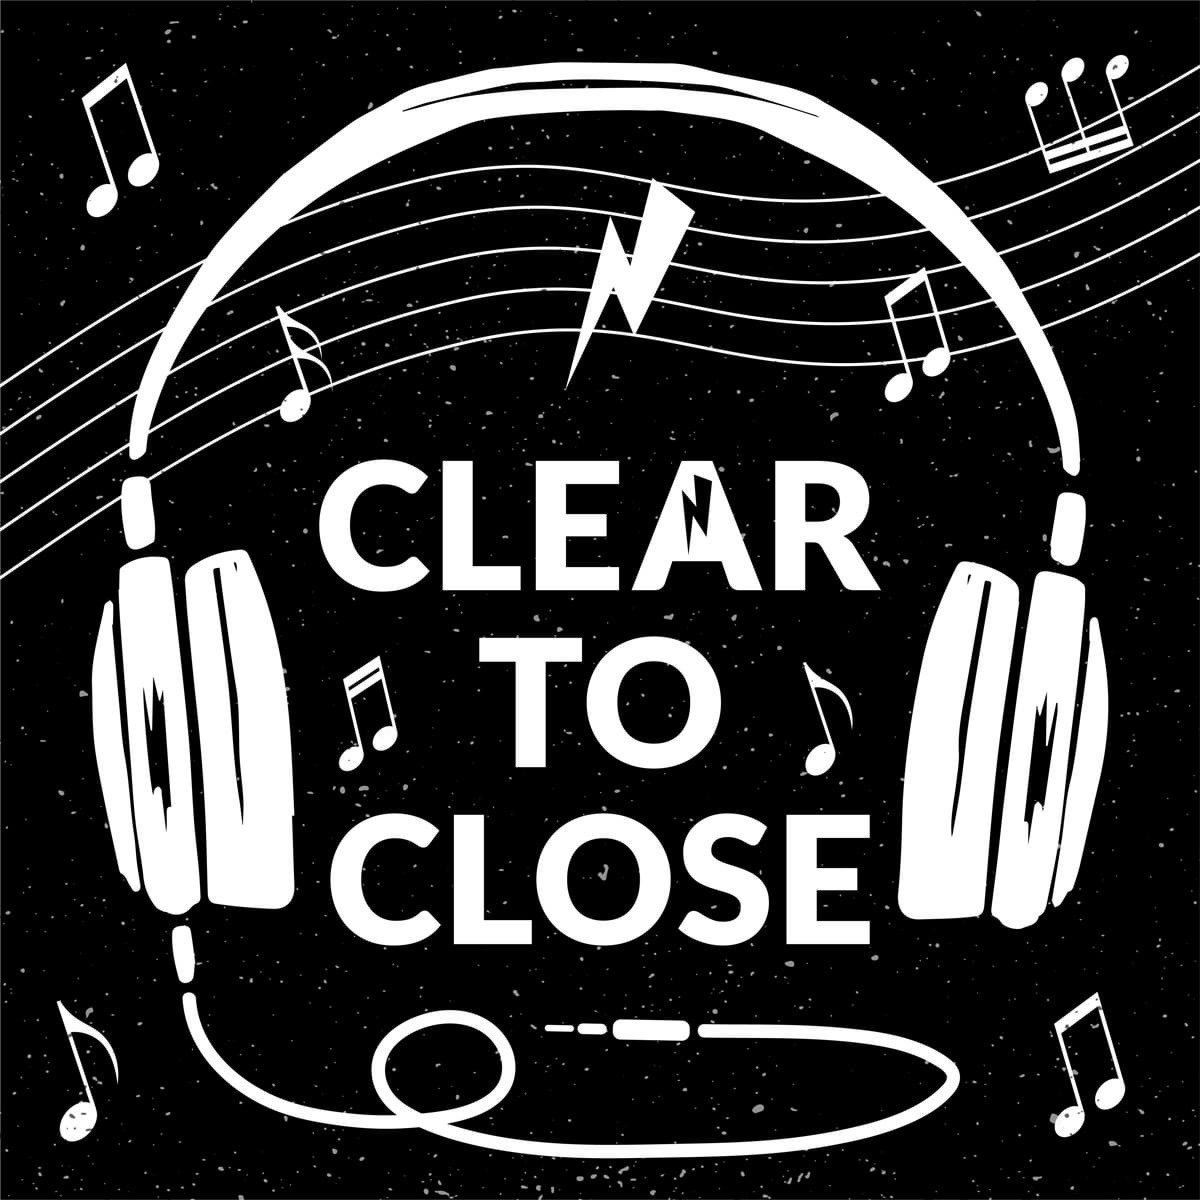 clear to close